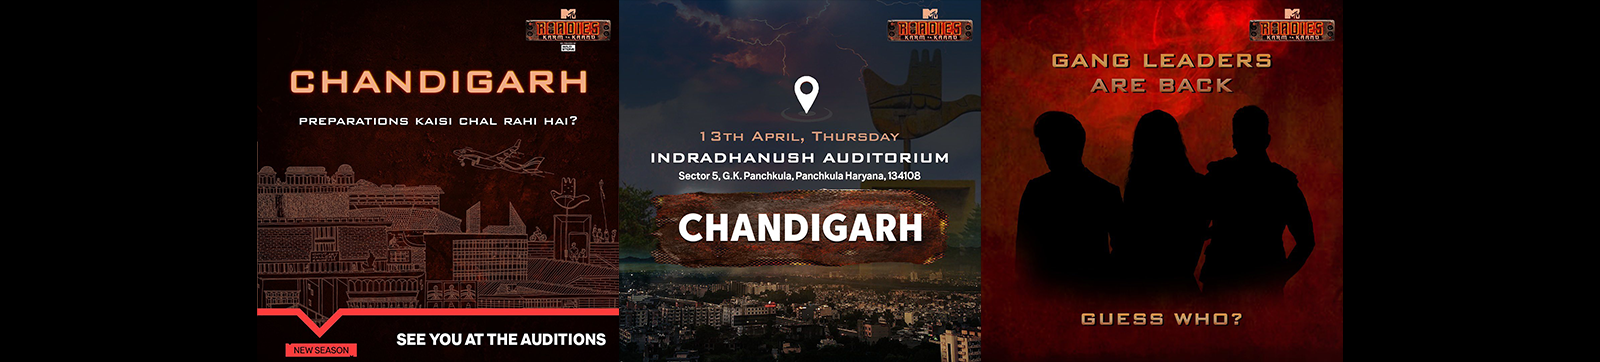 MTV Roadies Auditions in Chandigarh on April 13